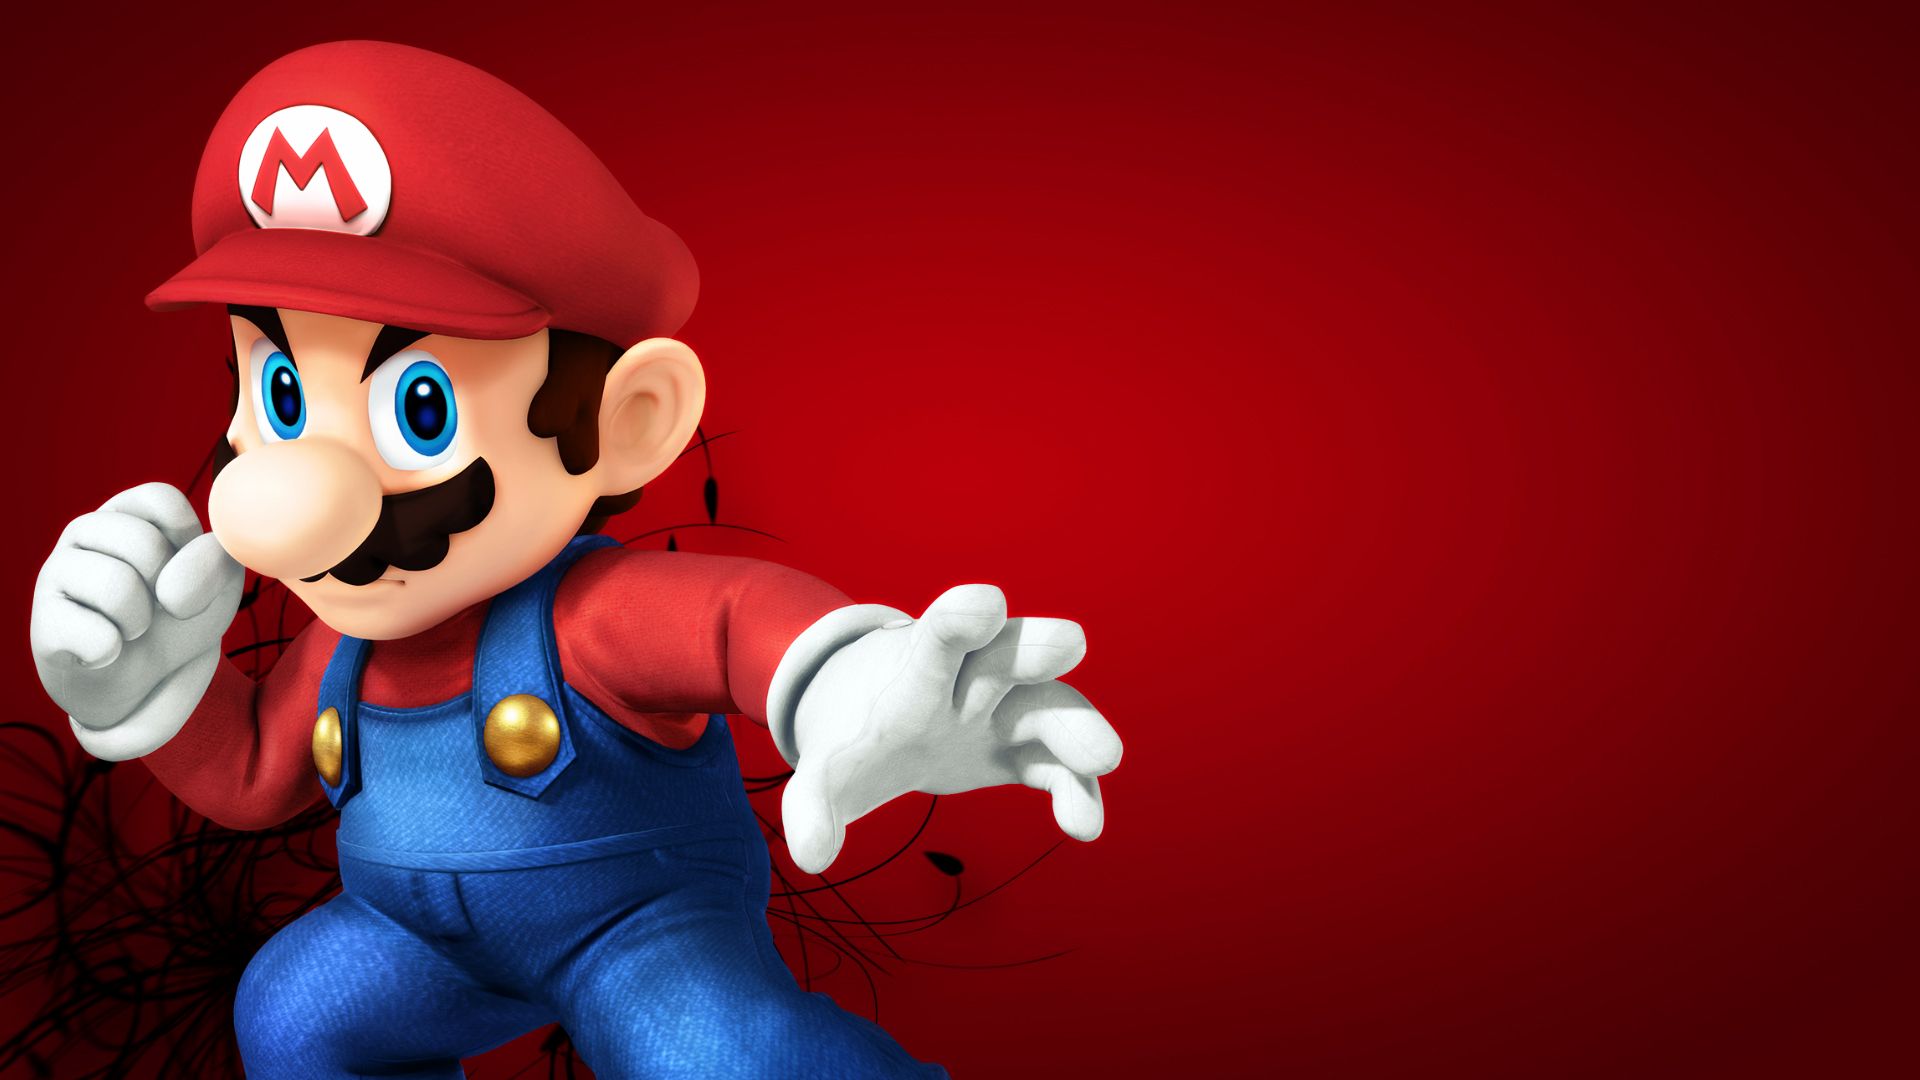 A mario character in red and blue - 